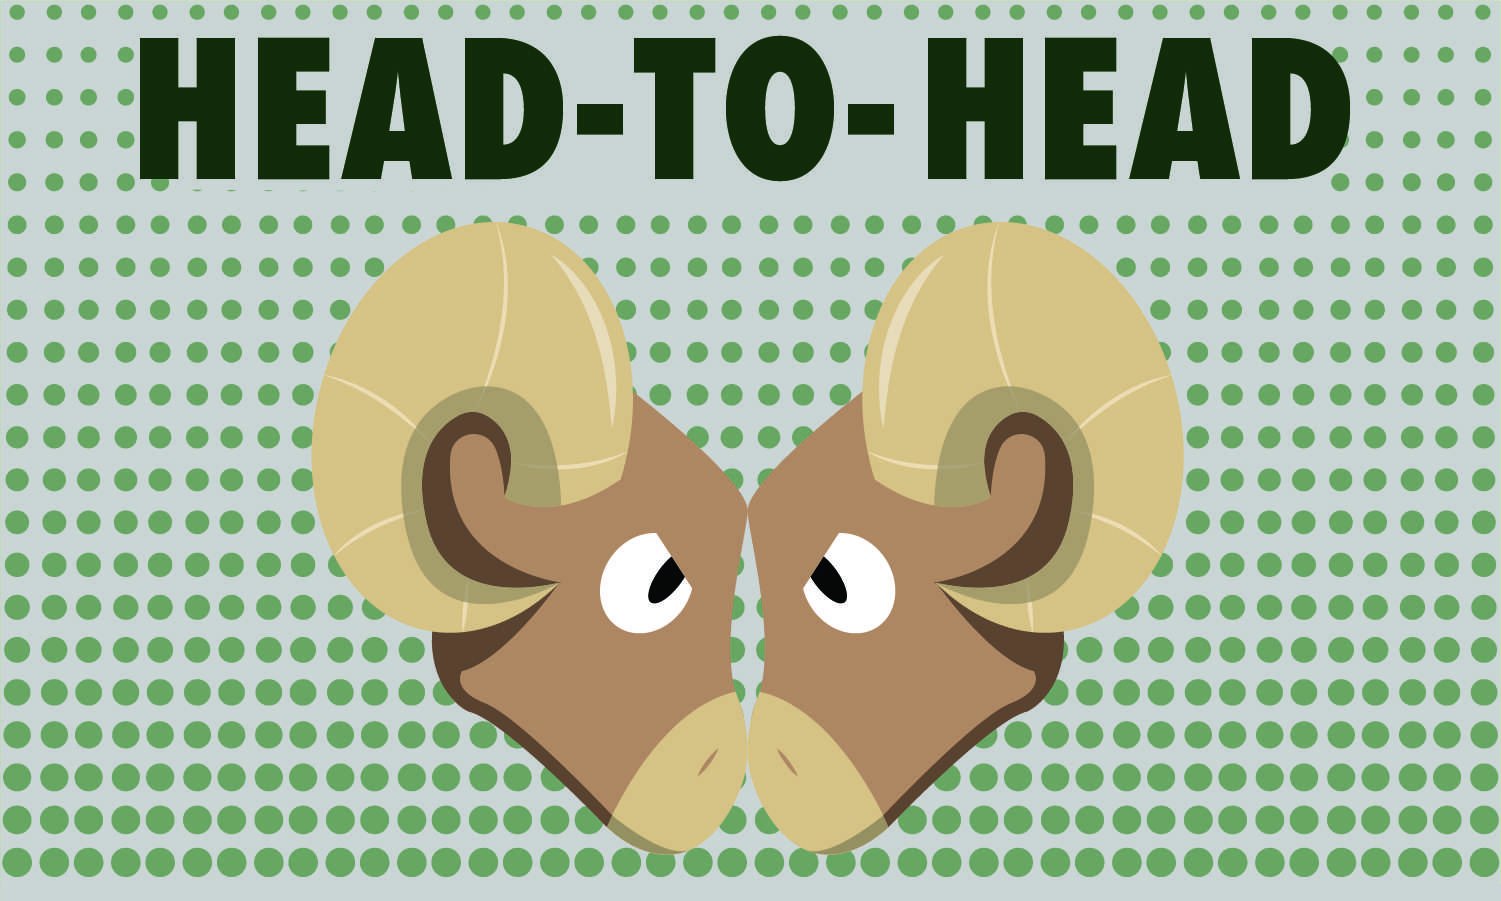 Graphic illustration depicting two Rams butting heads and text that reads "Head-To-Head"